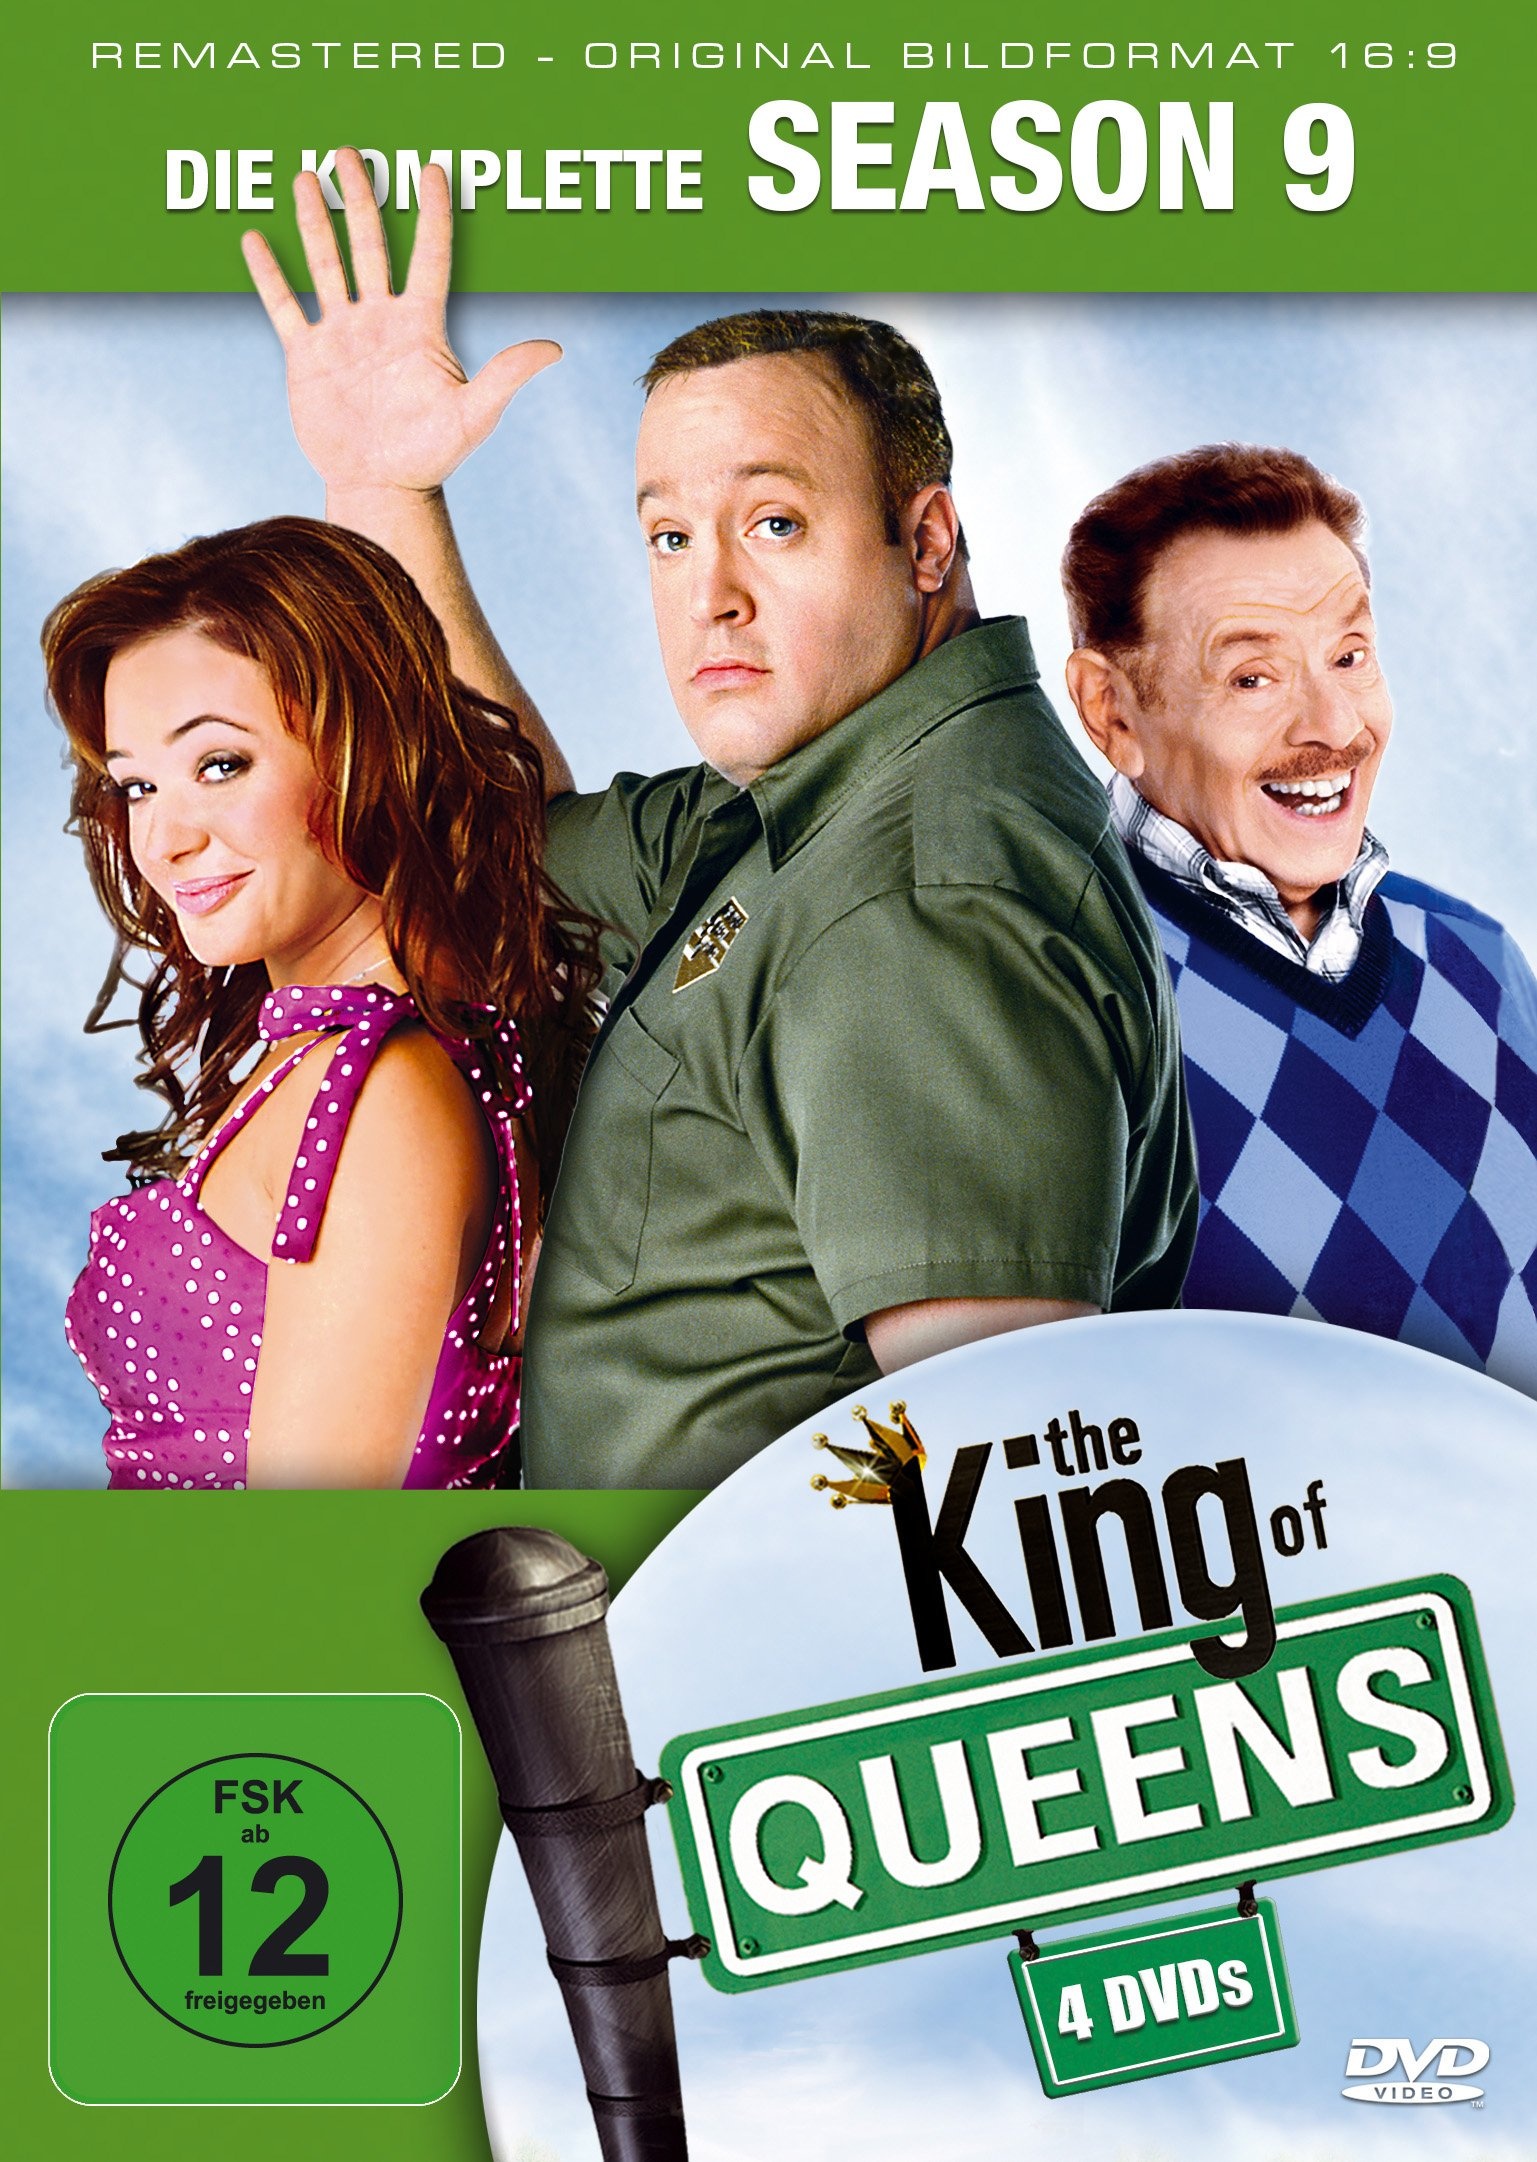 The King of Queens - Season 9 - Remastered [3 DVDs]